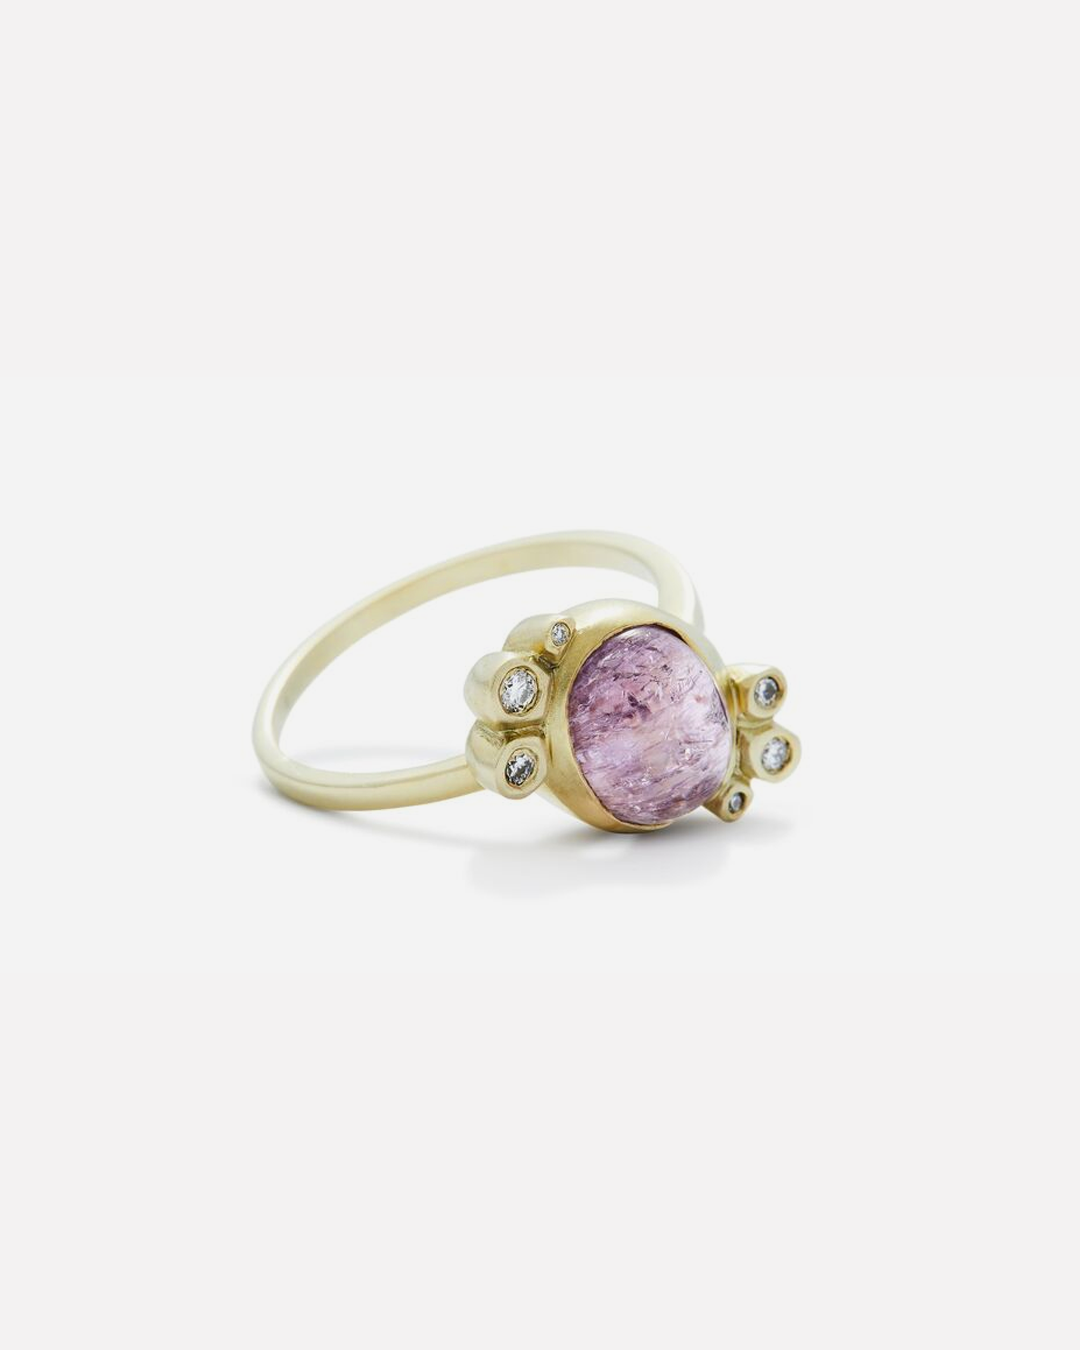 Bubble 24 / Imperial Topaz Ring By Hiroyo